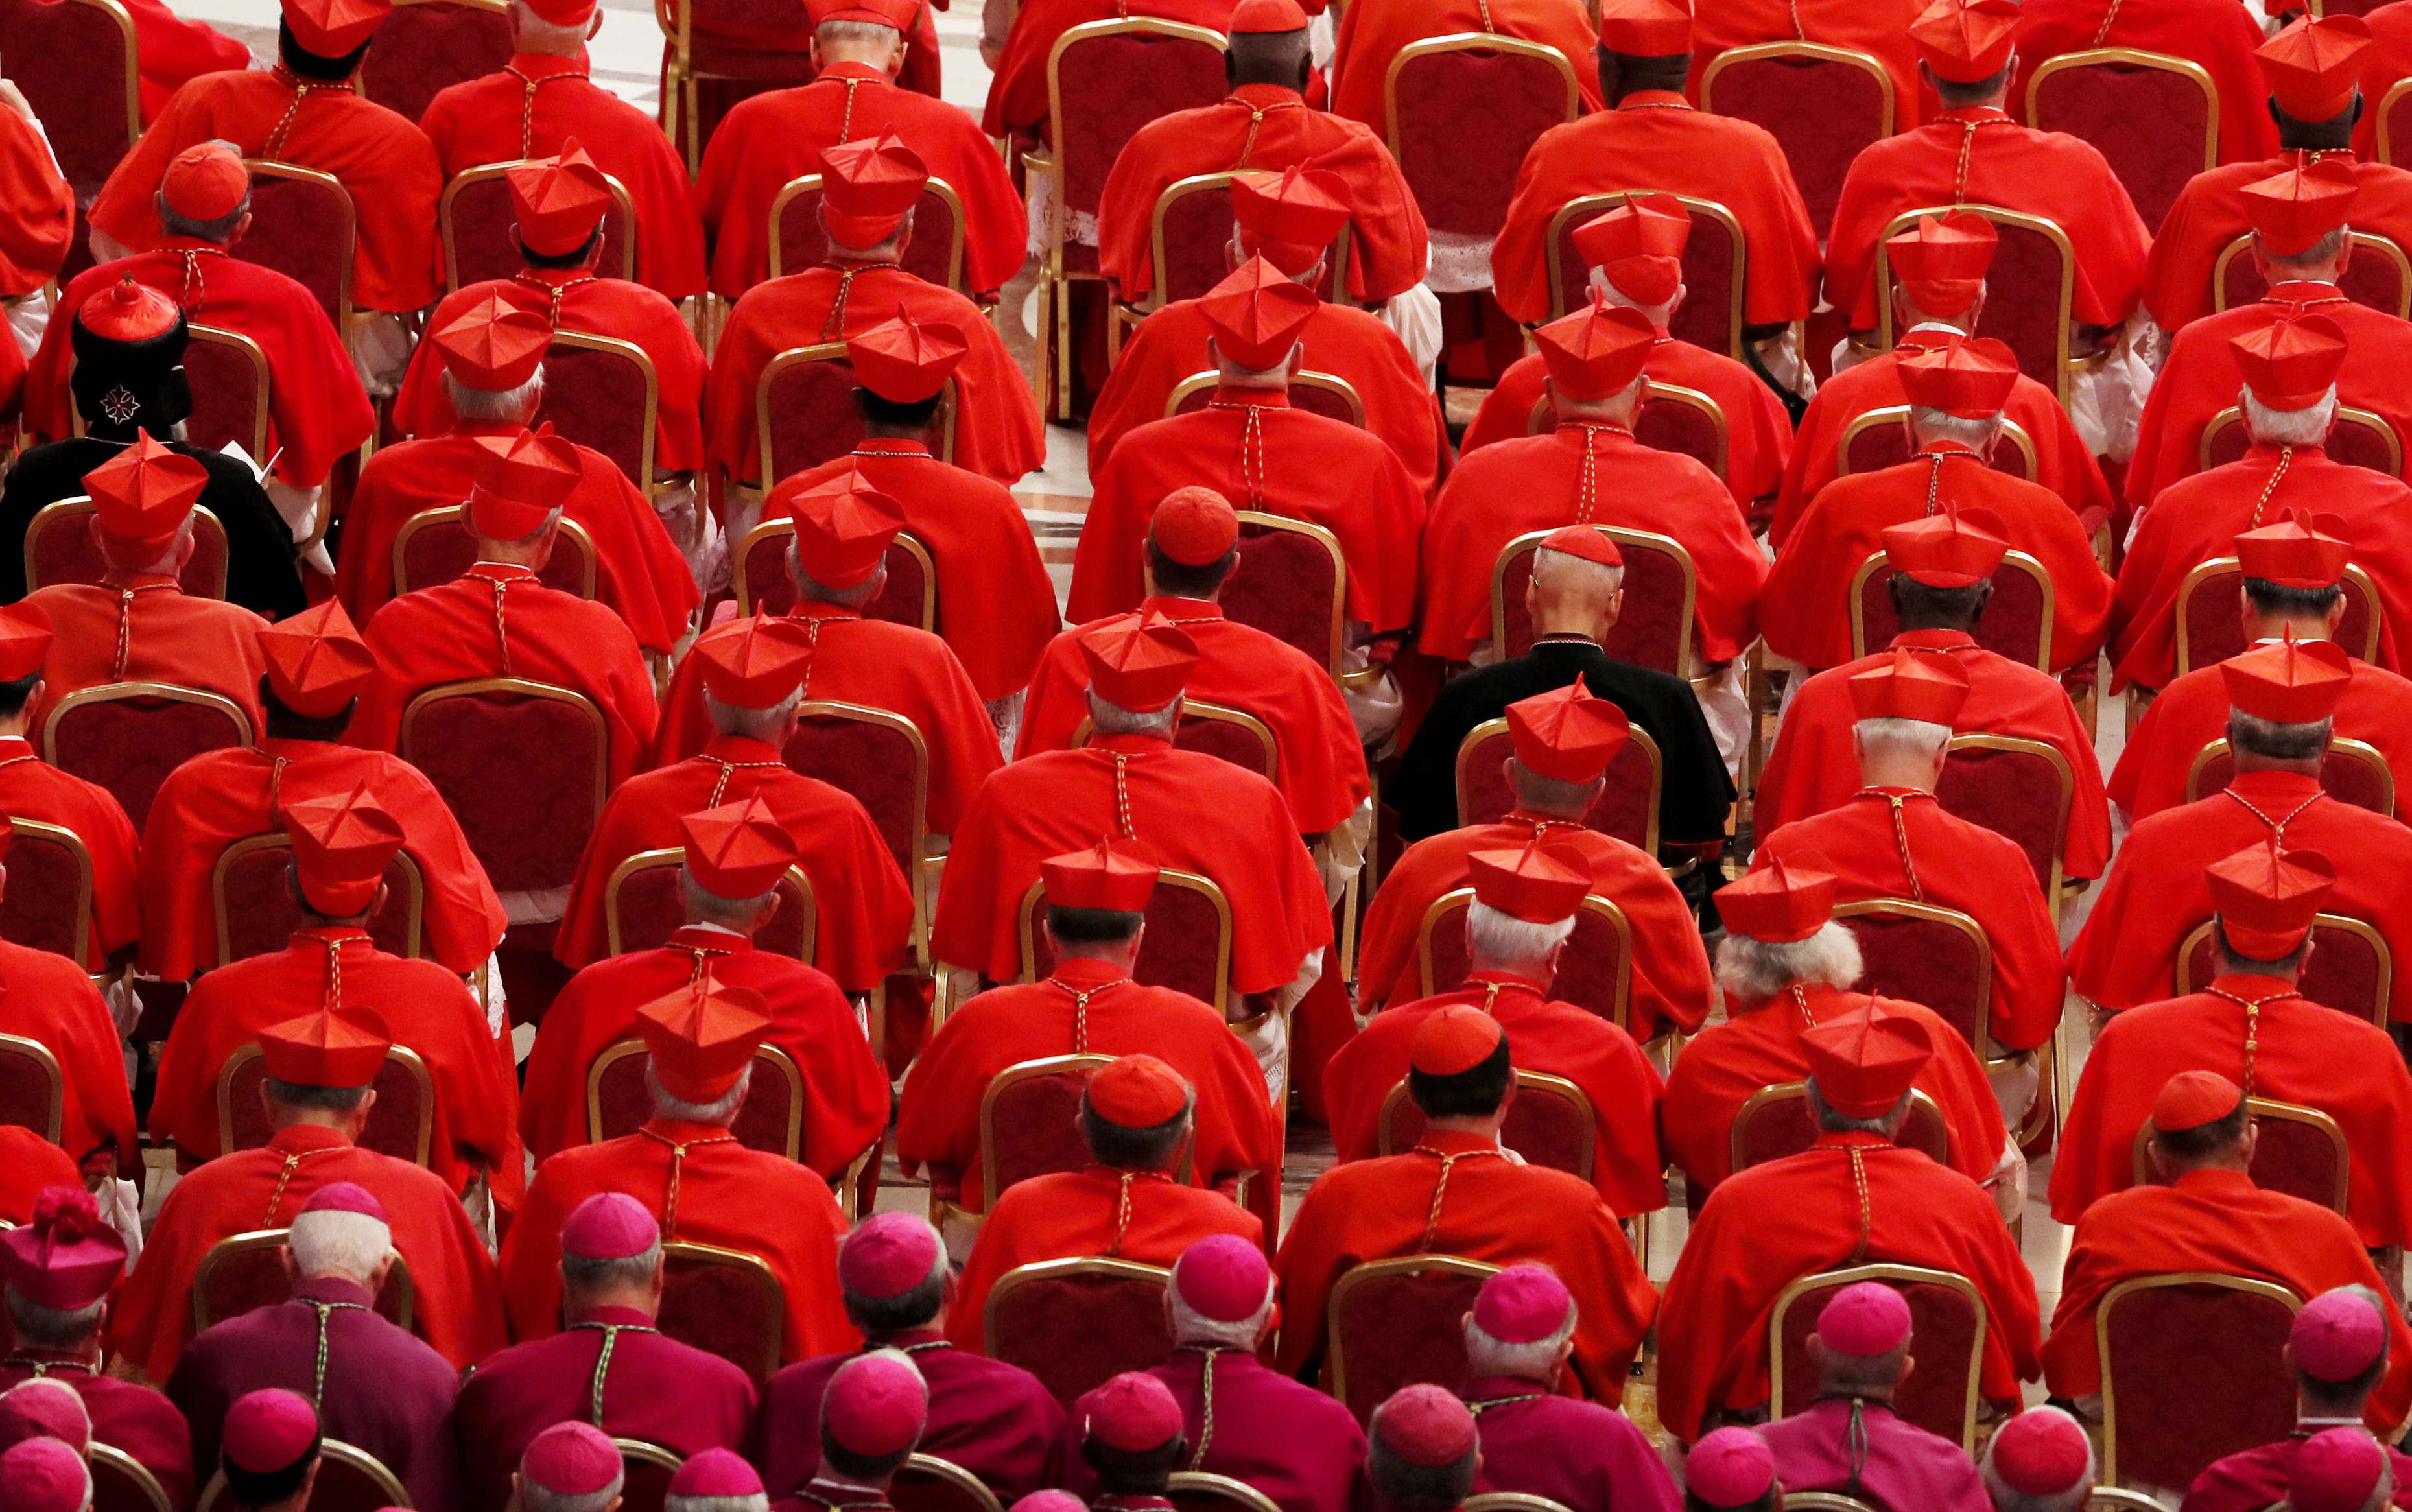 Explosive new book lifts lid on gay priests in the Vatican